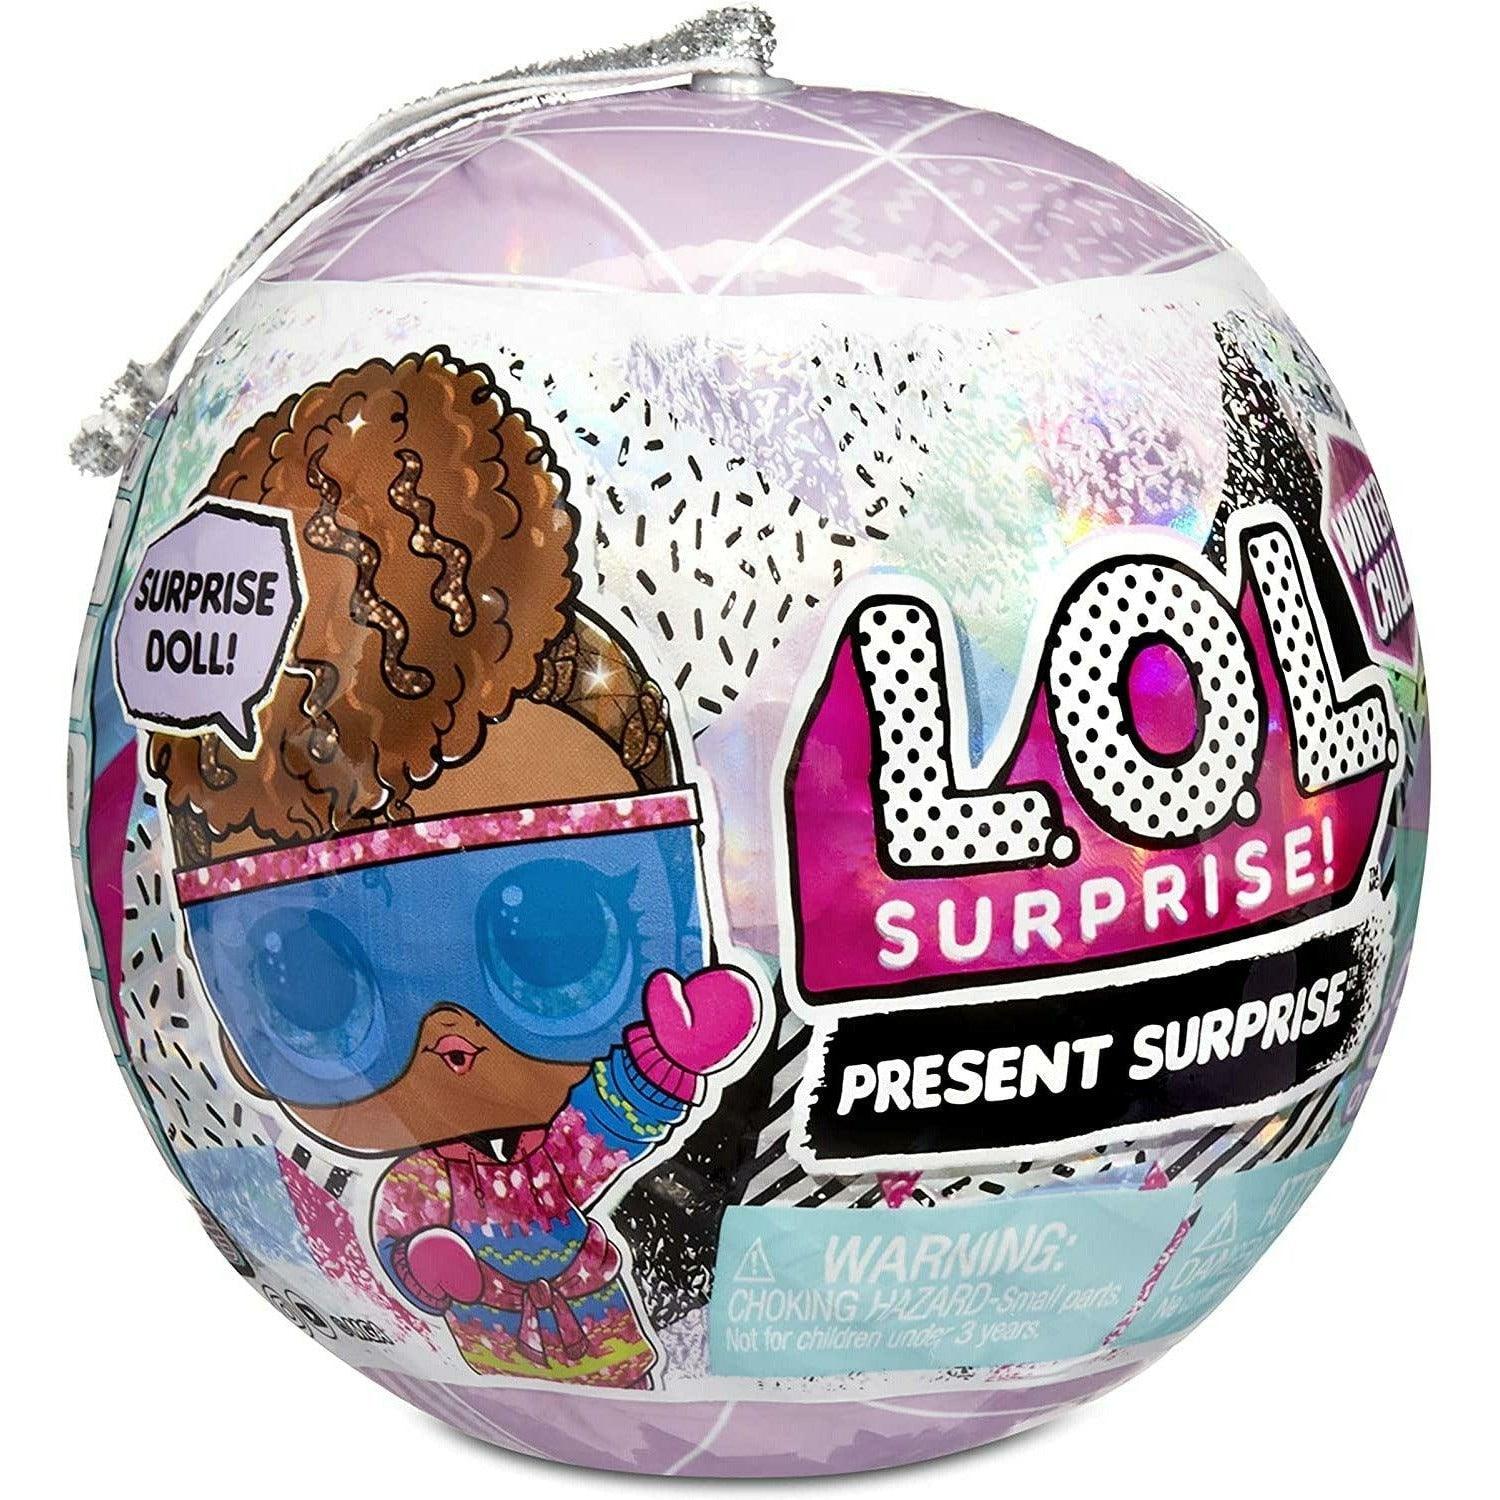 L.O.L Surprise Winter Chill Dolls with 8 Surprises Including Collectible Doll with Winter Fashion Outfits, Accessories, Holiday Ornament Ball - BumbleToys - 5-7 Years, Dolls, Girls, L.O.L, Miniature Dolls & Accessories, OXE